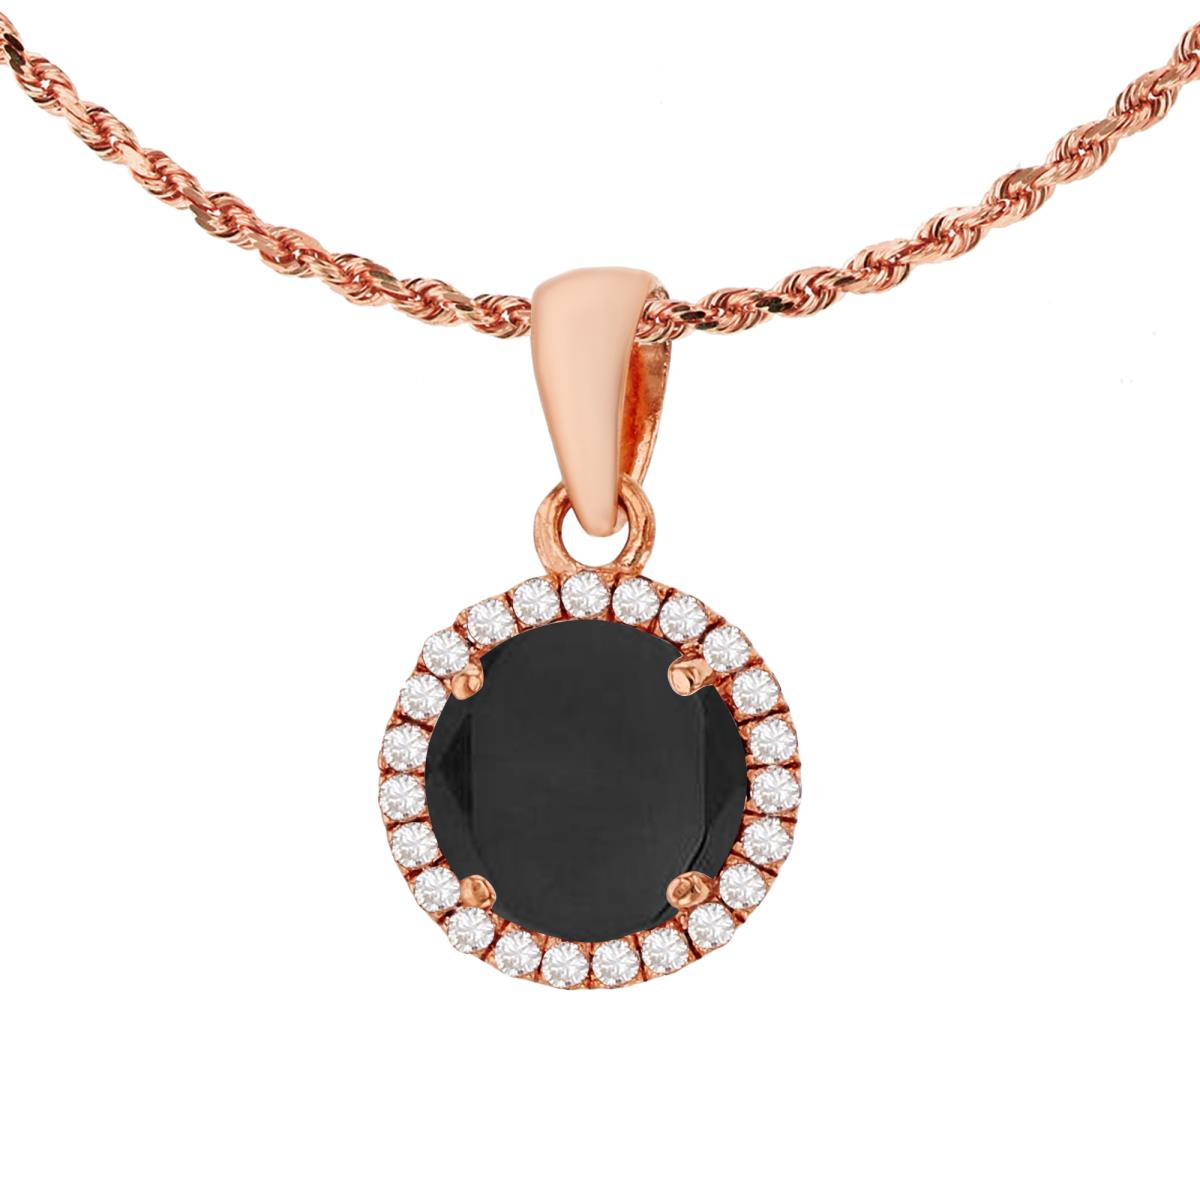 10K Rose Gold 7mm Cushion Onyx & 0.12 CTTW Diamond Halo 18" Rope Chain Necklace